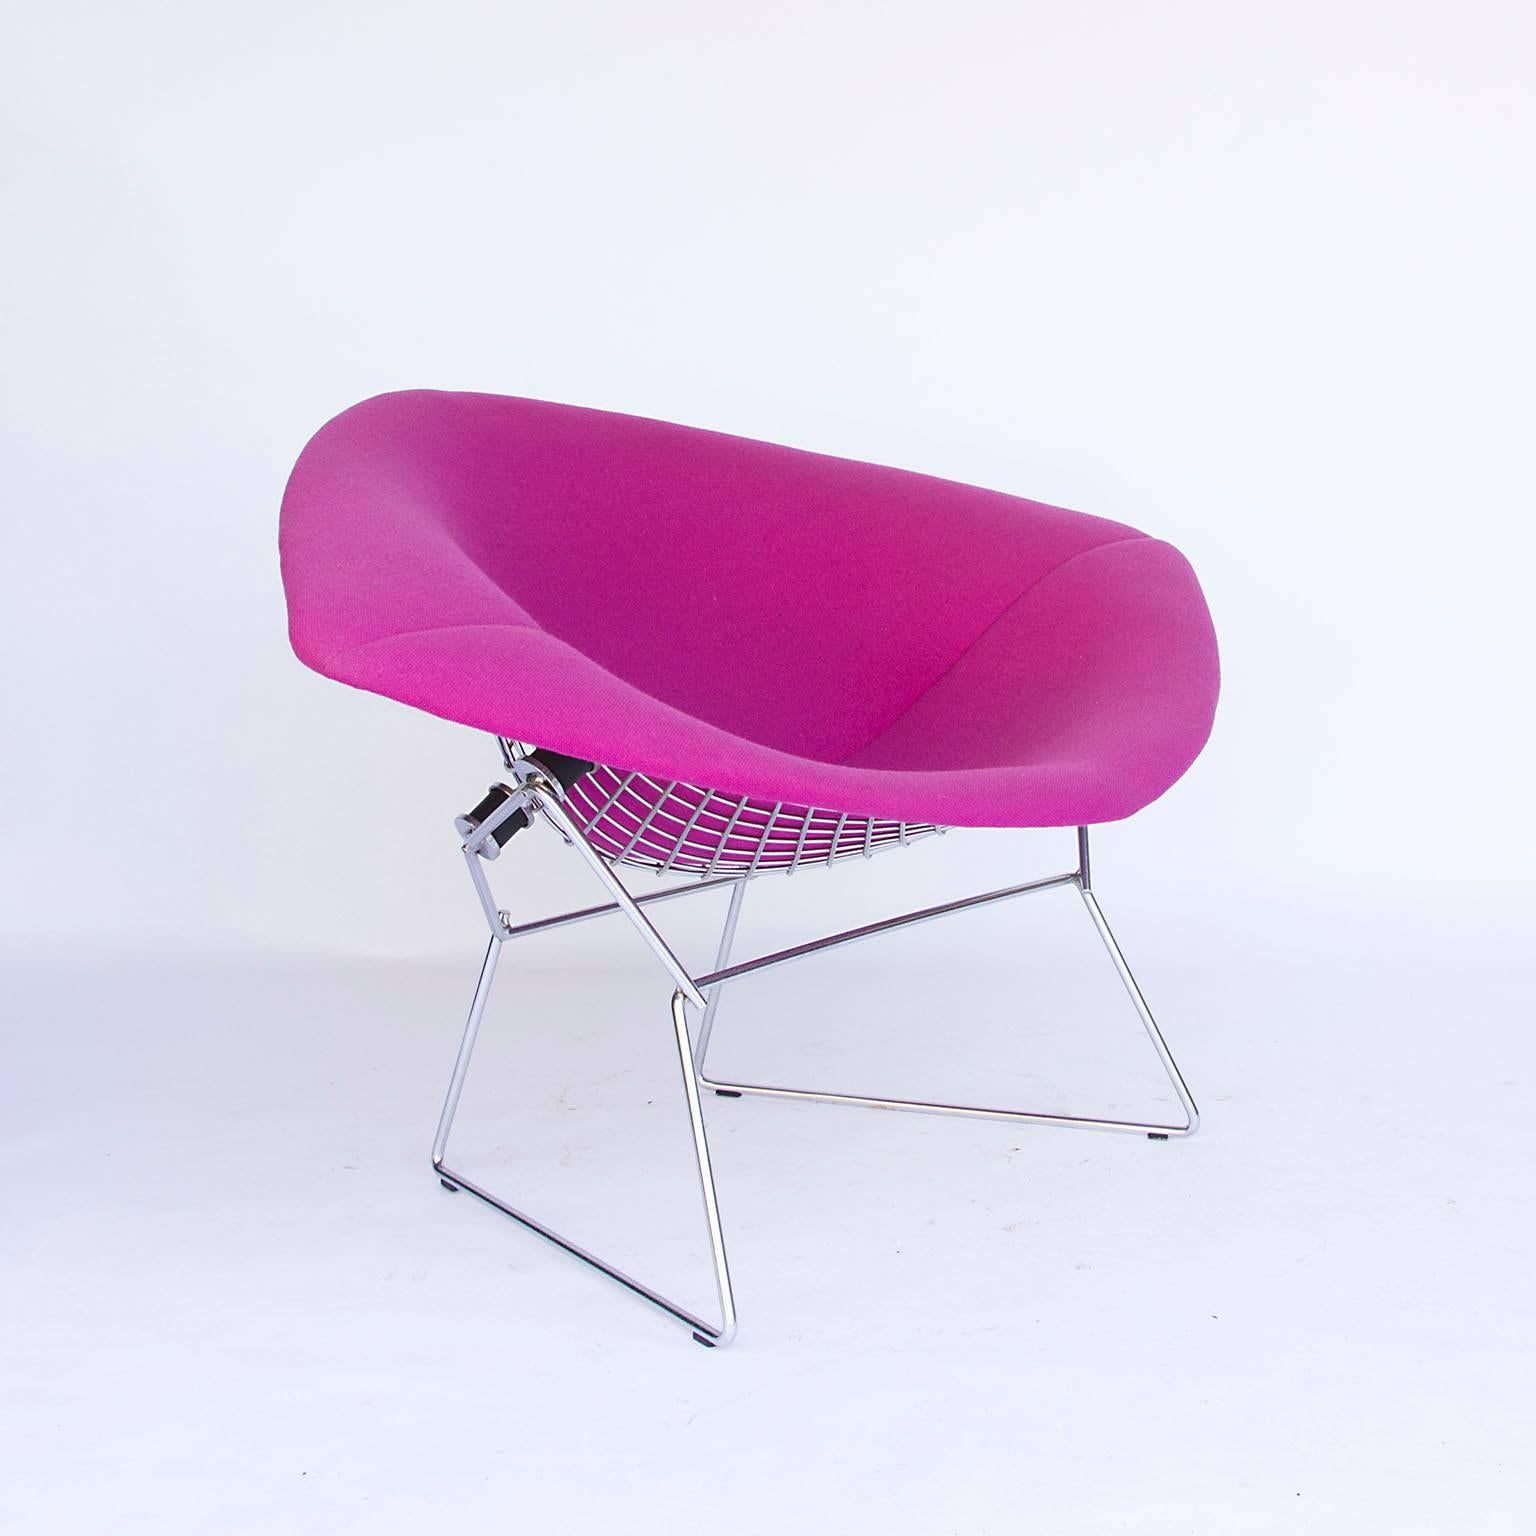 Large diamond chair designed by Harry Bertoia for Knoll in 1952. The chair has its original full fabric cover. The chromed steel is in excellent condition. An iconic chair in perfect condition. 

Weight 11 kg

Free shipping for Amsterdam, Haarlem